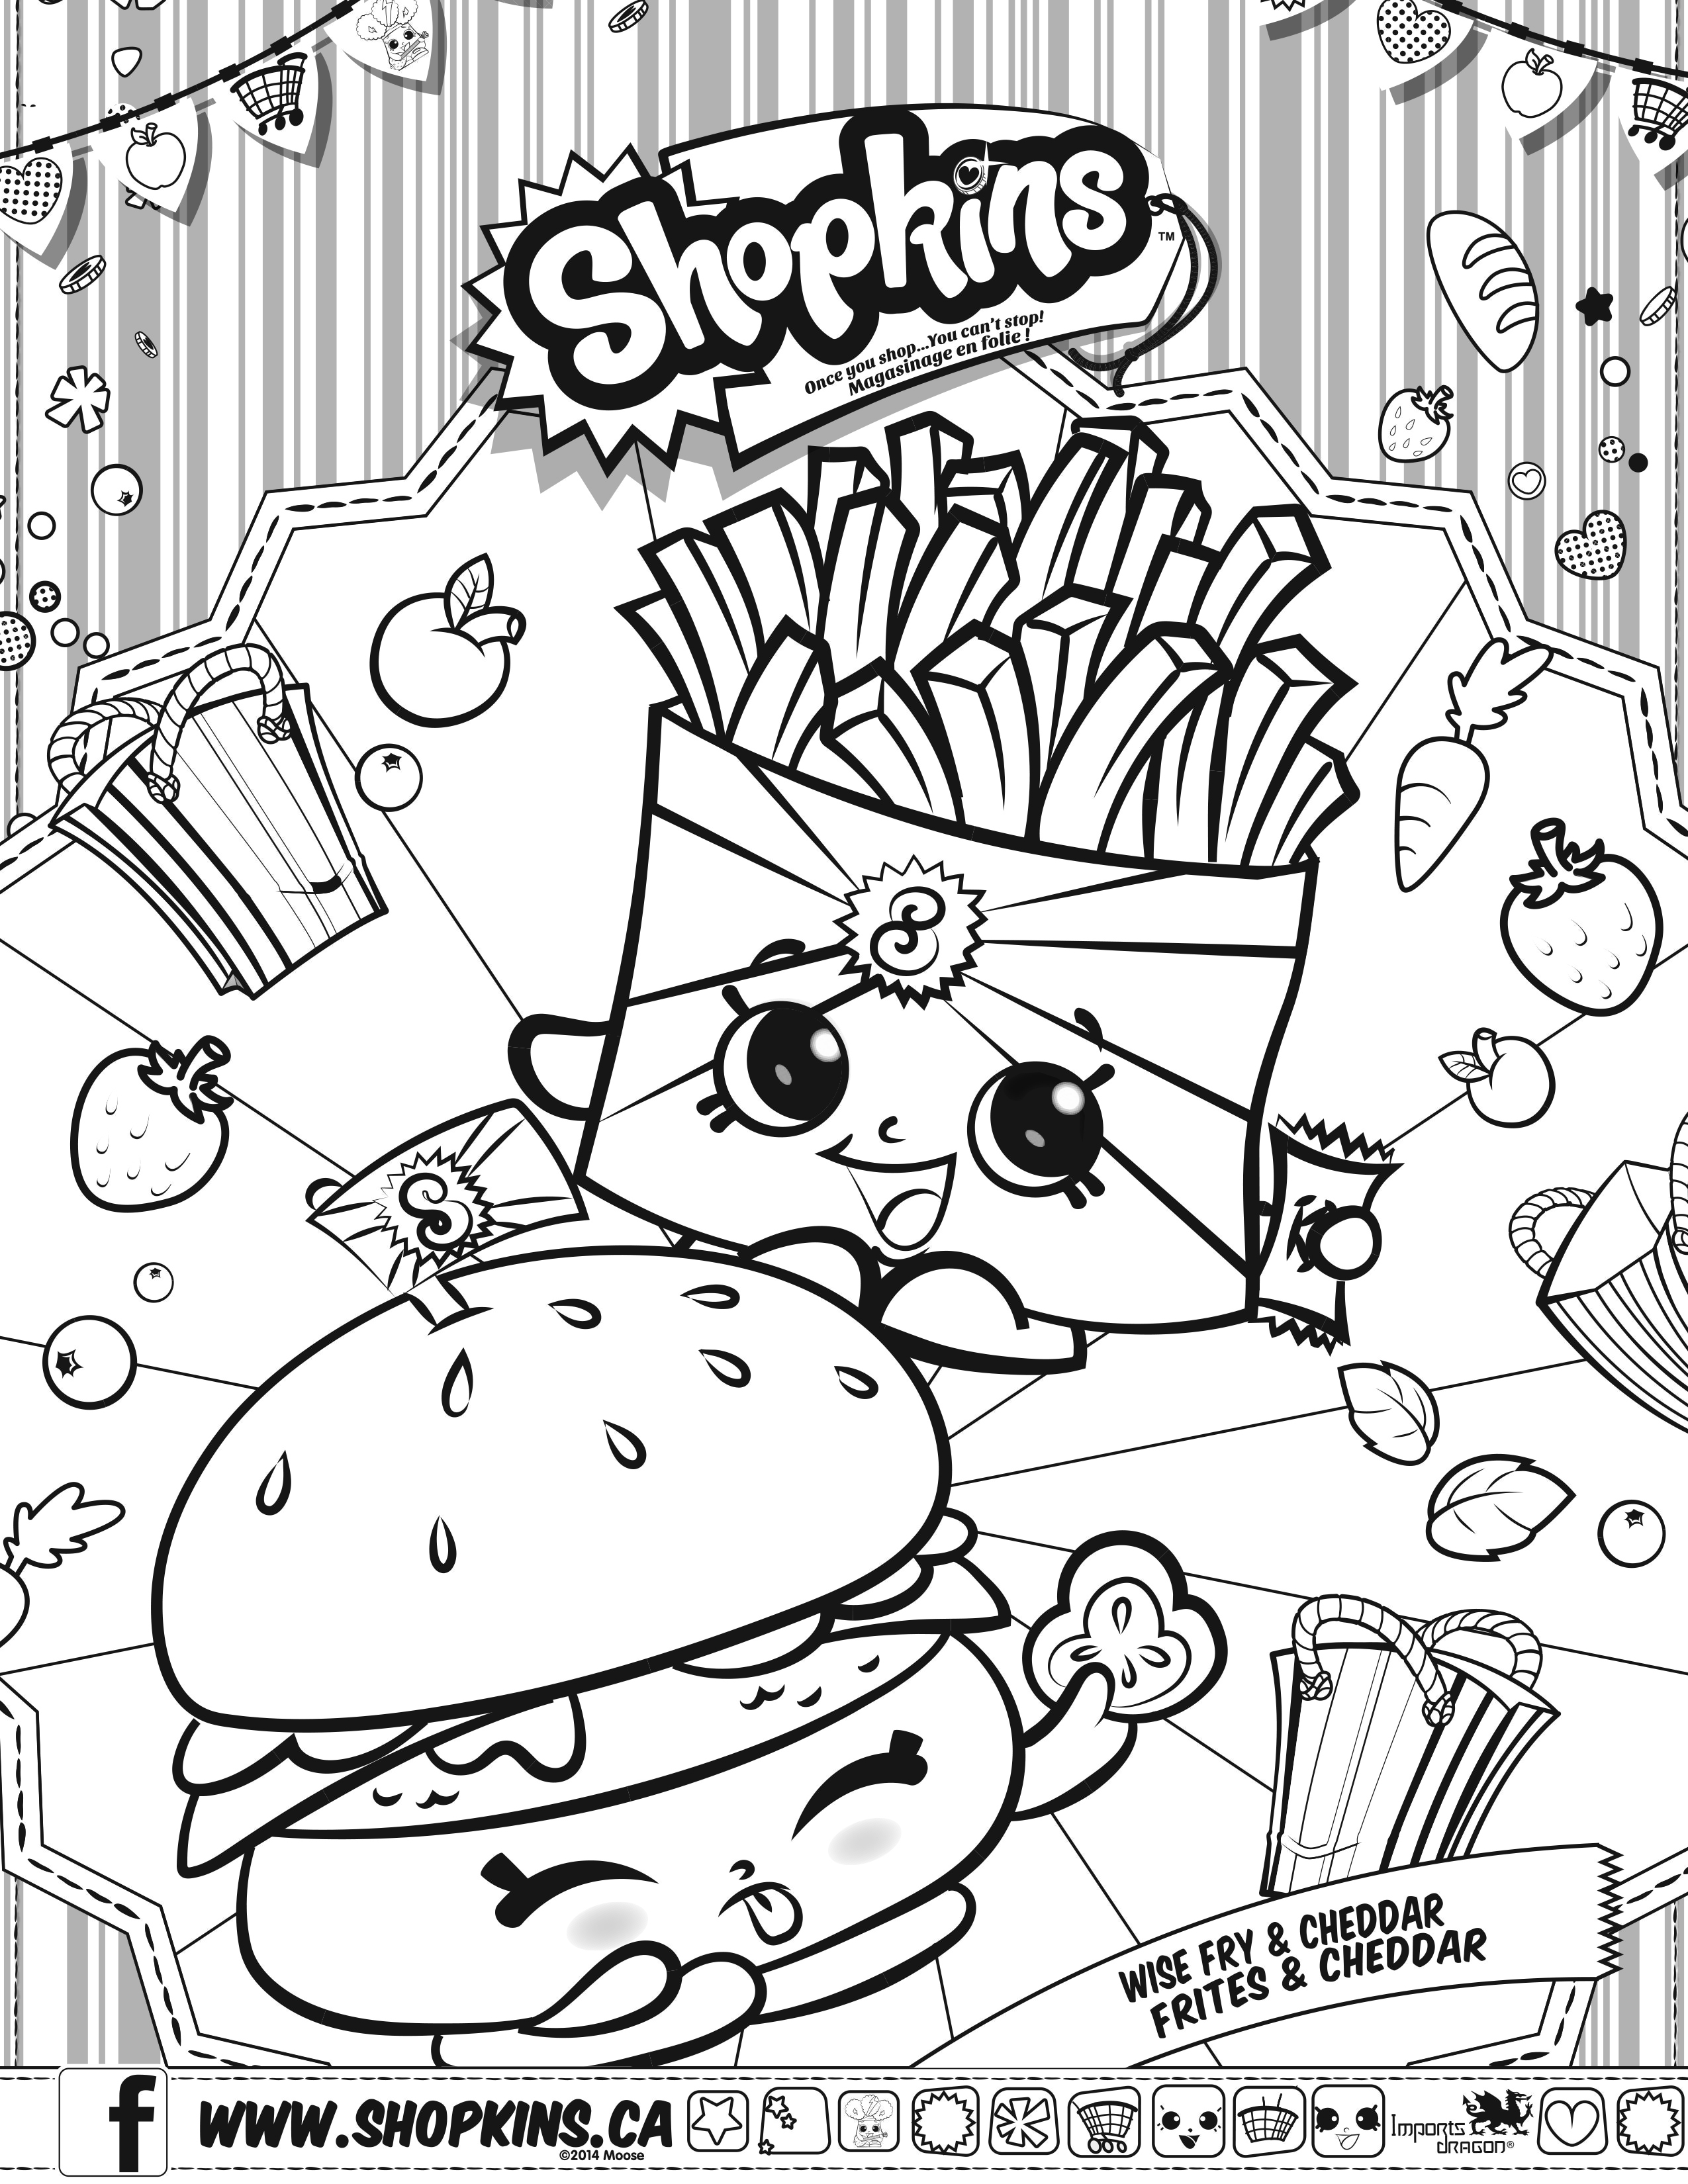 Coloring Pages To Print Shopkins - Coloring